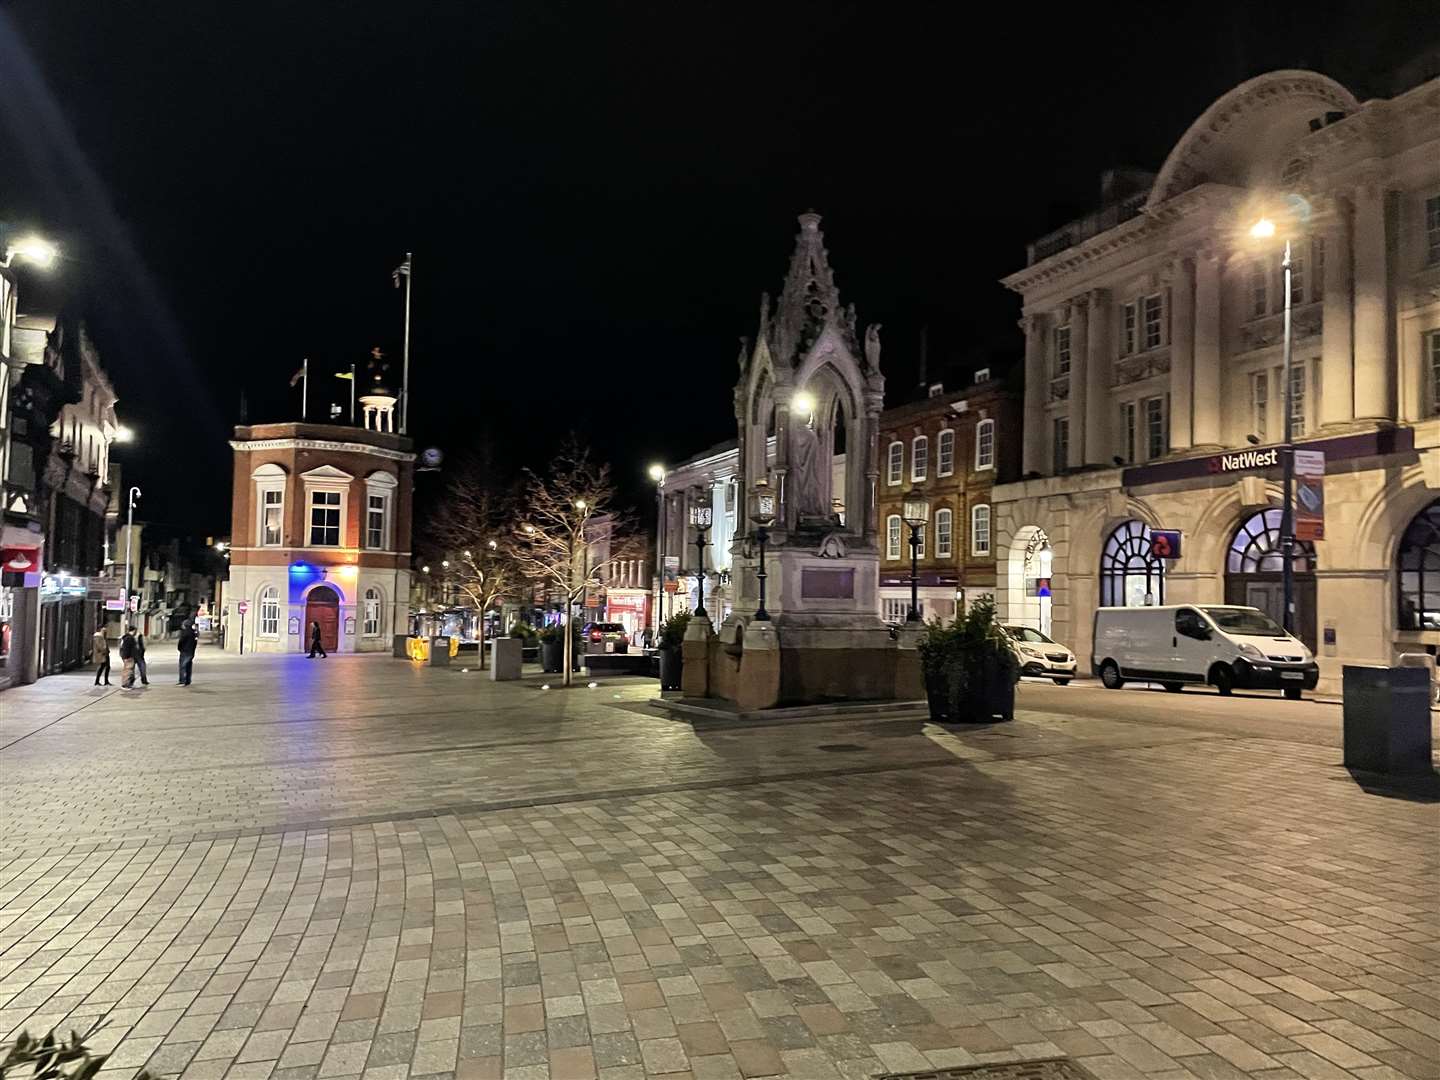 Another saw two arrested following an alleged assault in Maidstone town centre